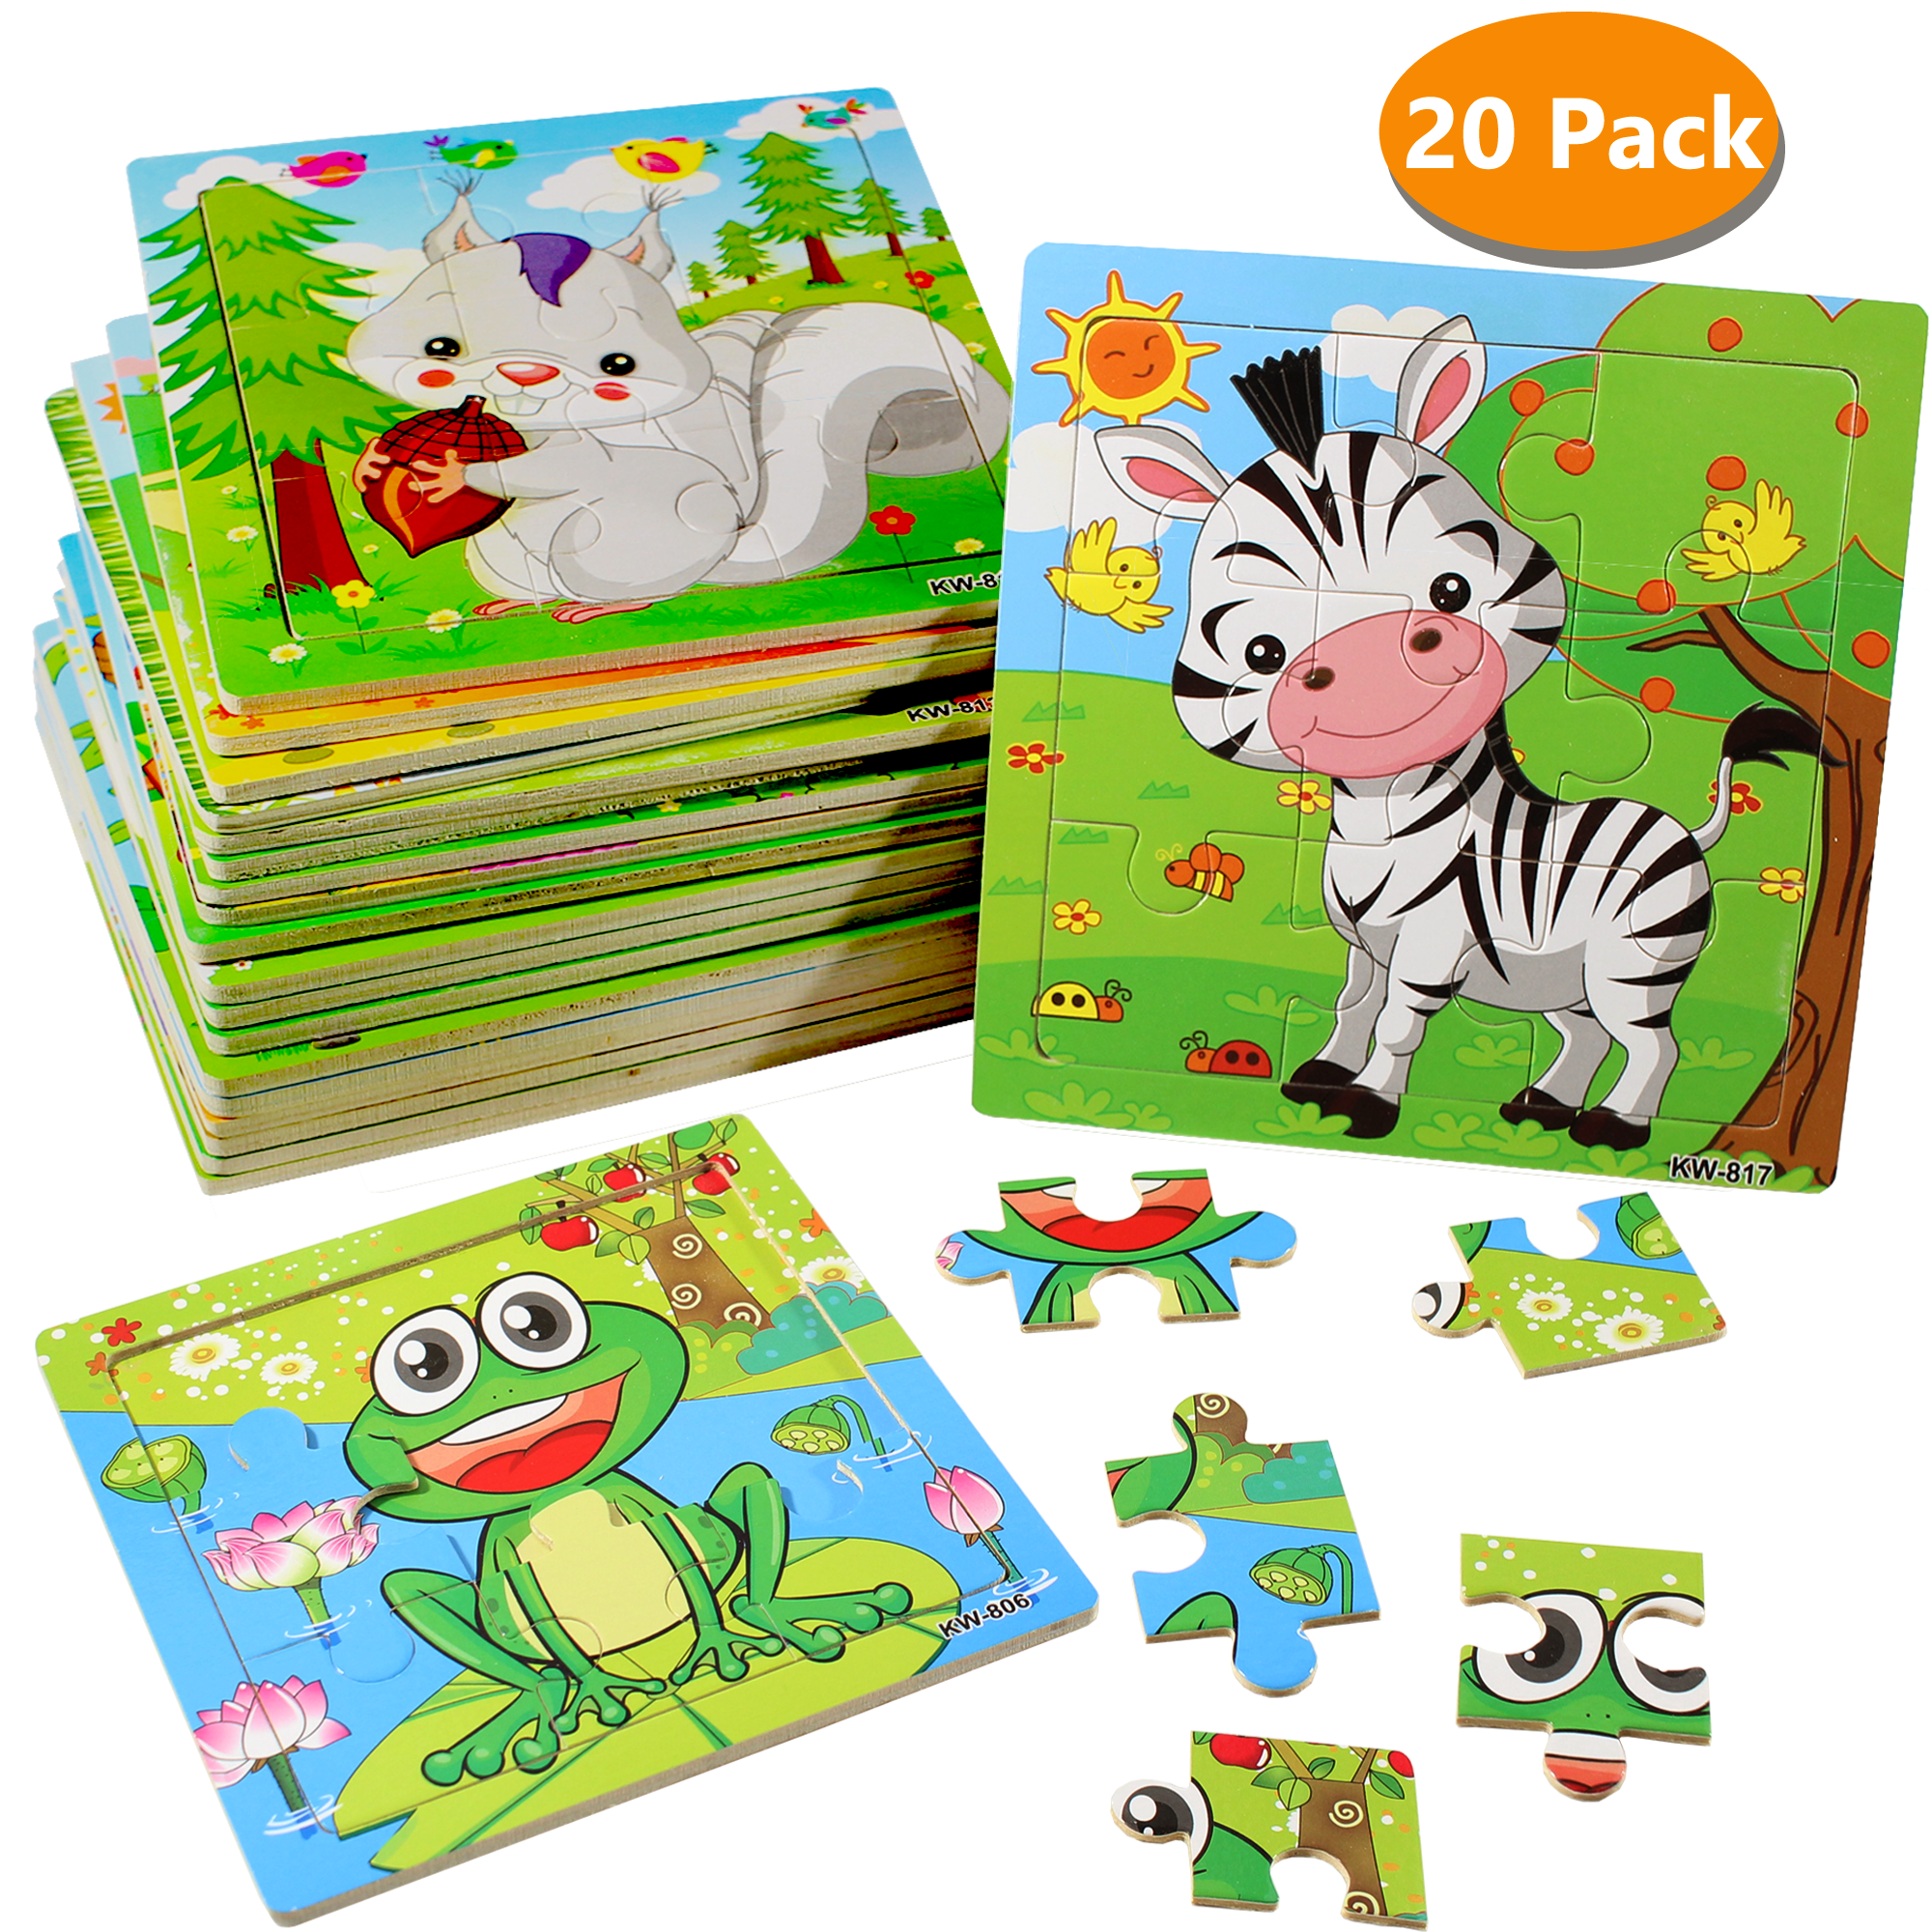 Toddler Preschool Game/Toy 2 Wooden Educational Toddler Jigsaw Puzzle 